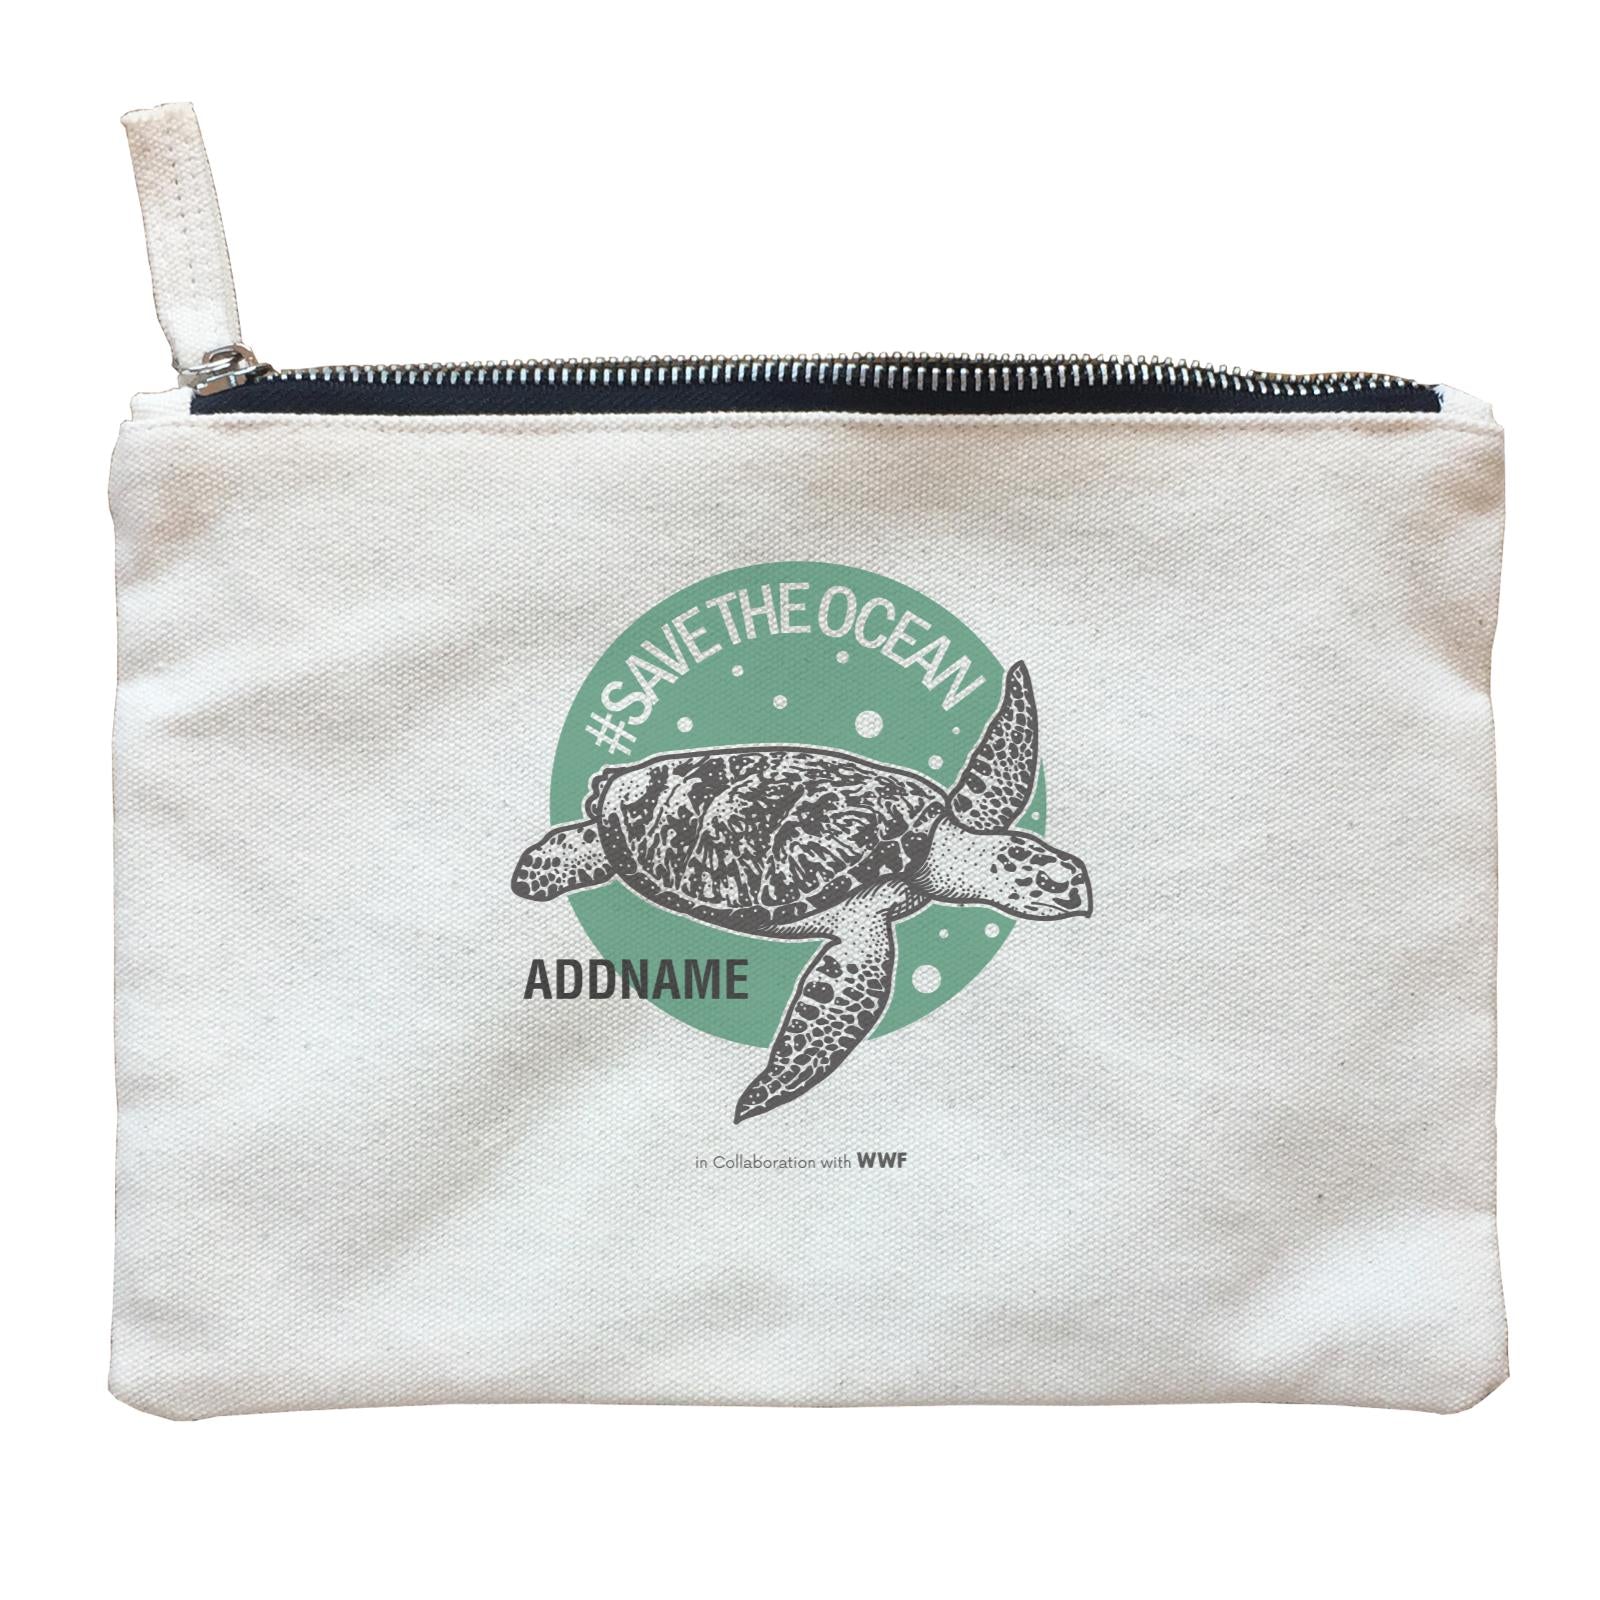 Hashtag Save the Ocean with Turtle Addname Zipper Pouch